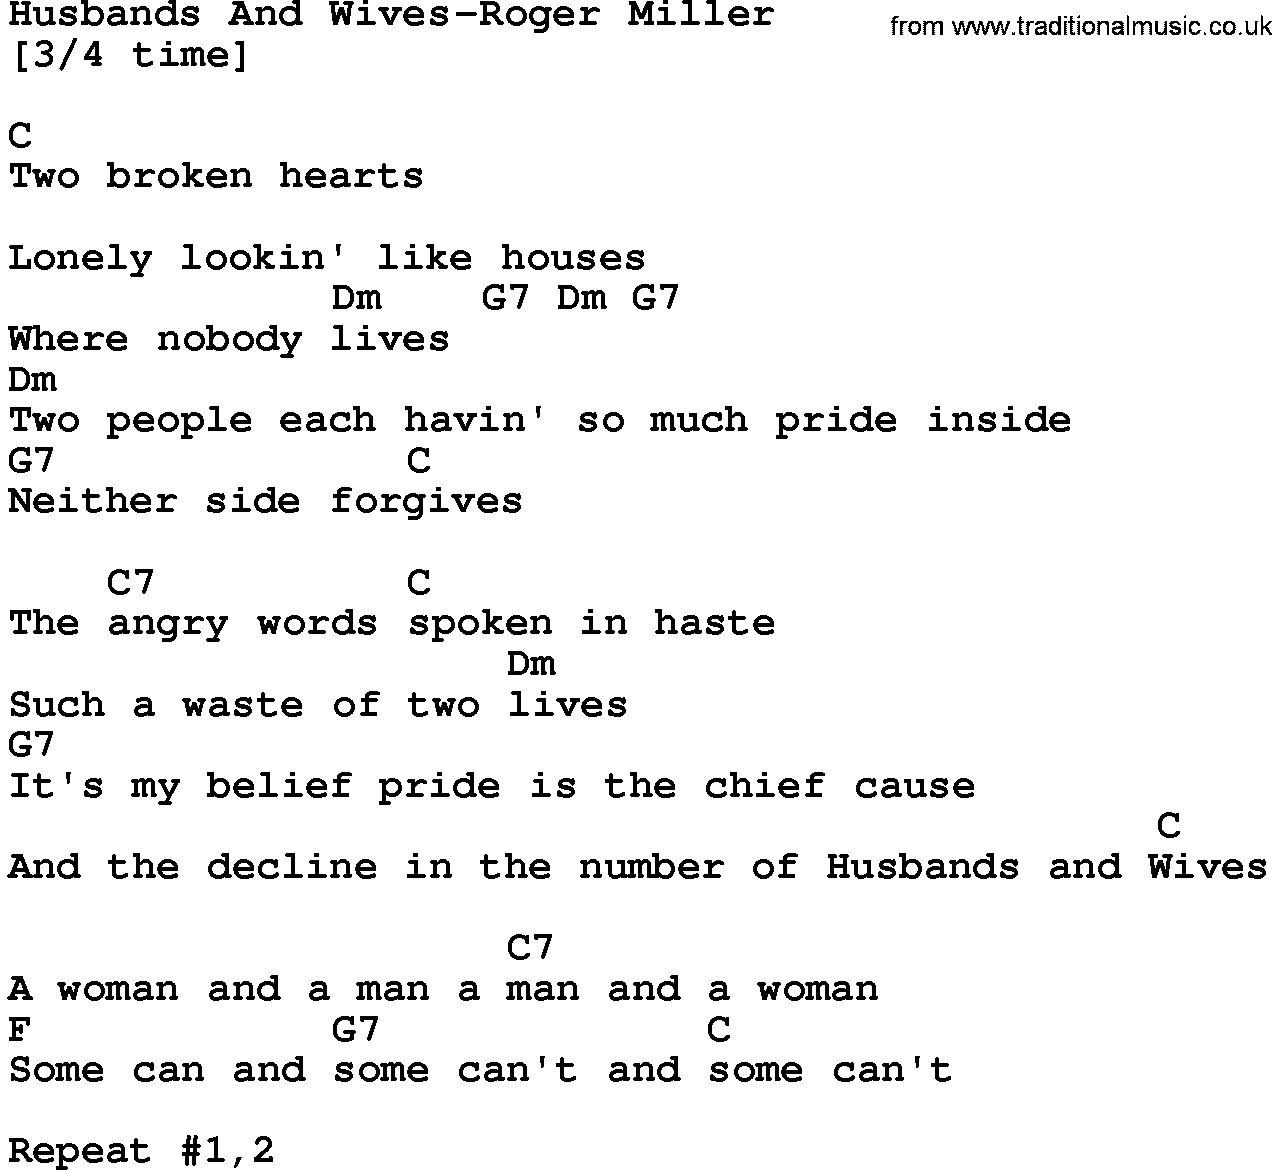 Country music song: Husbands And Wives-Roger Miller lyrics and chords